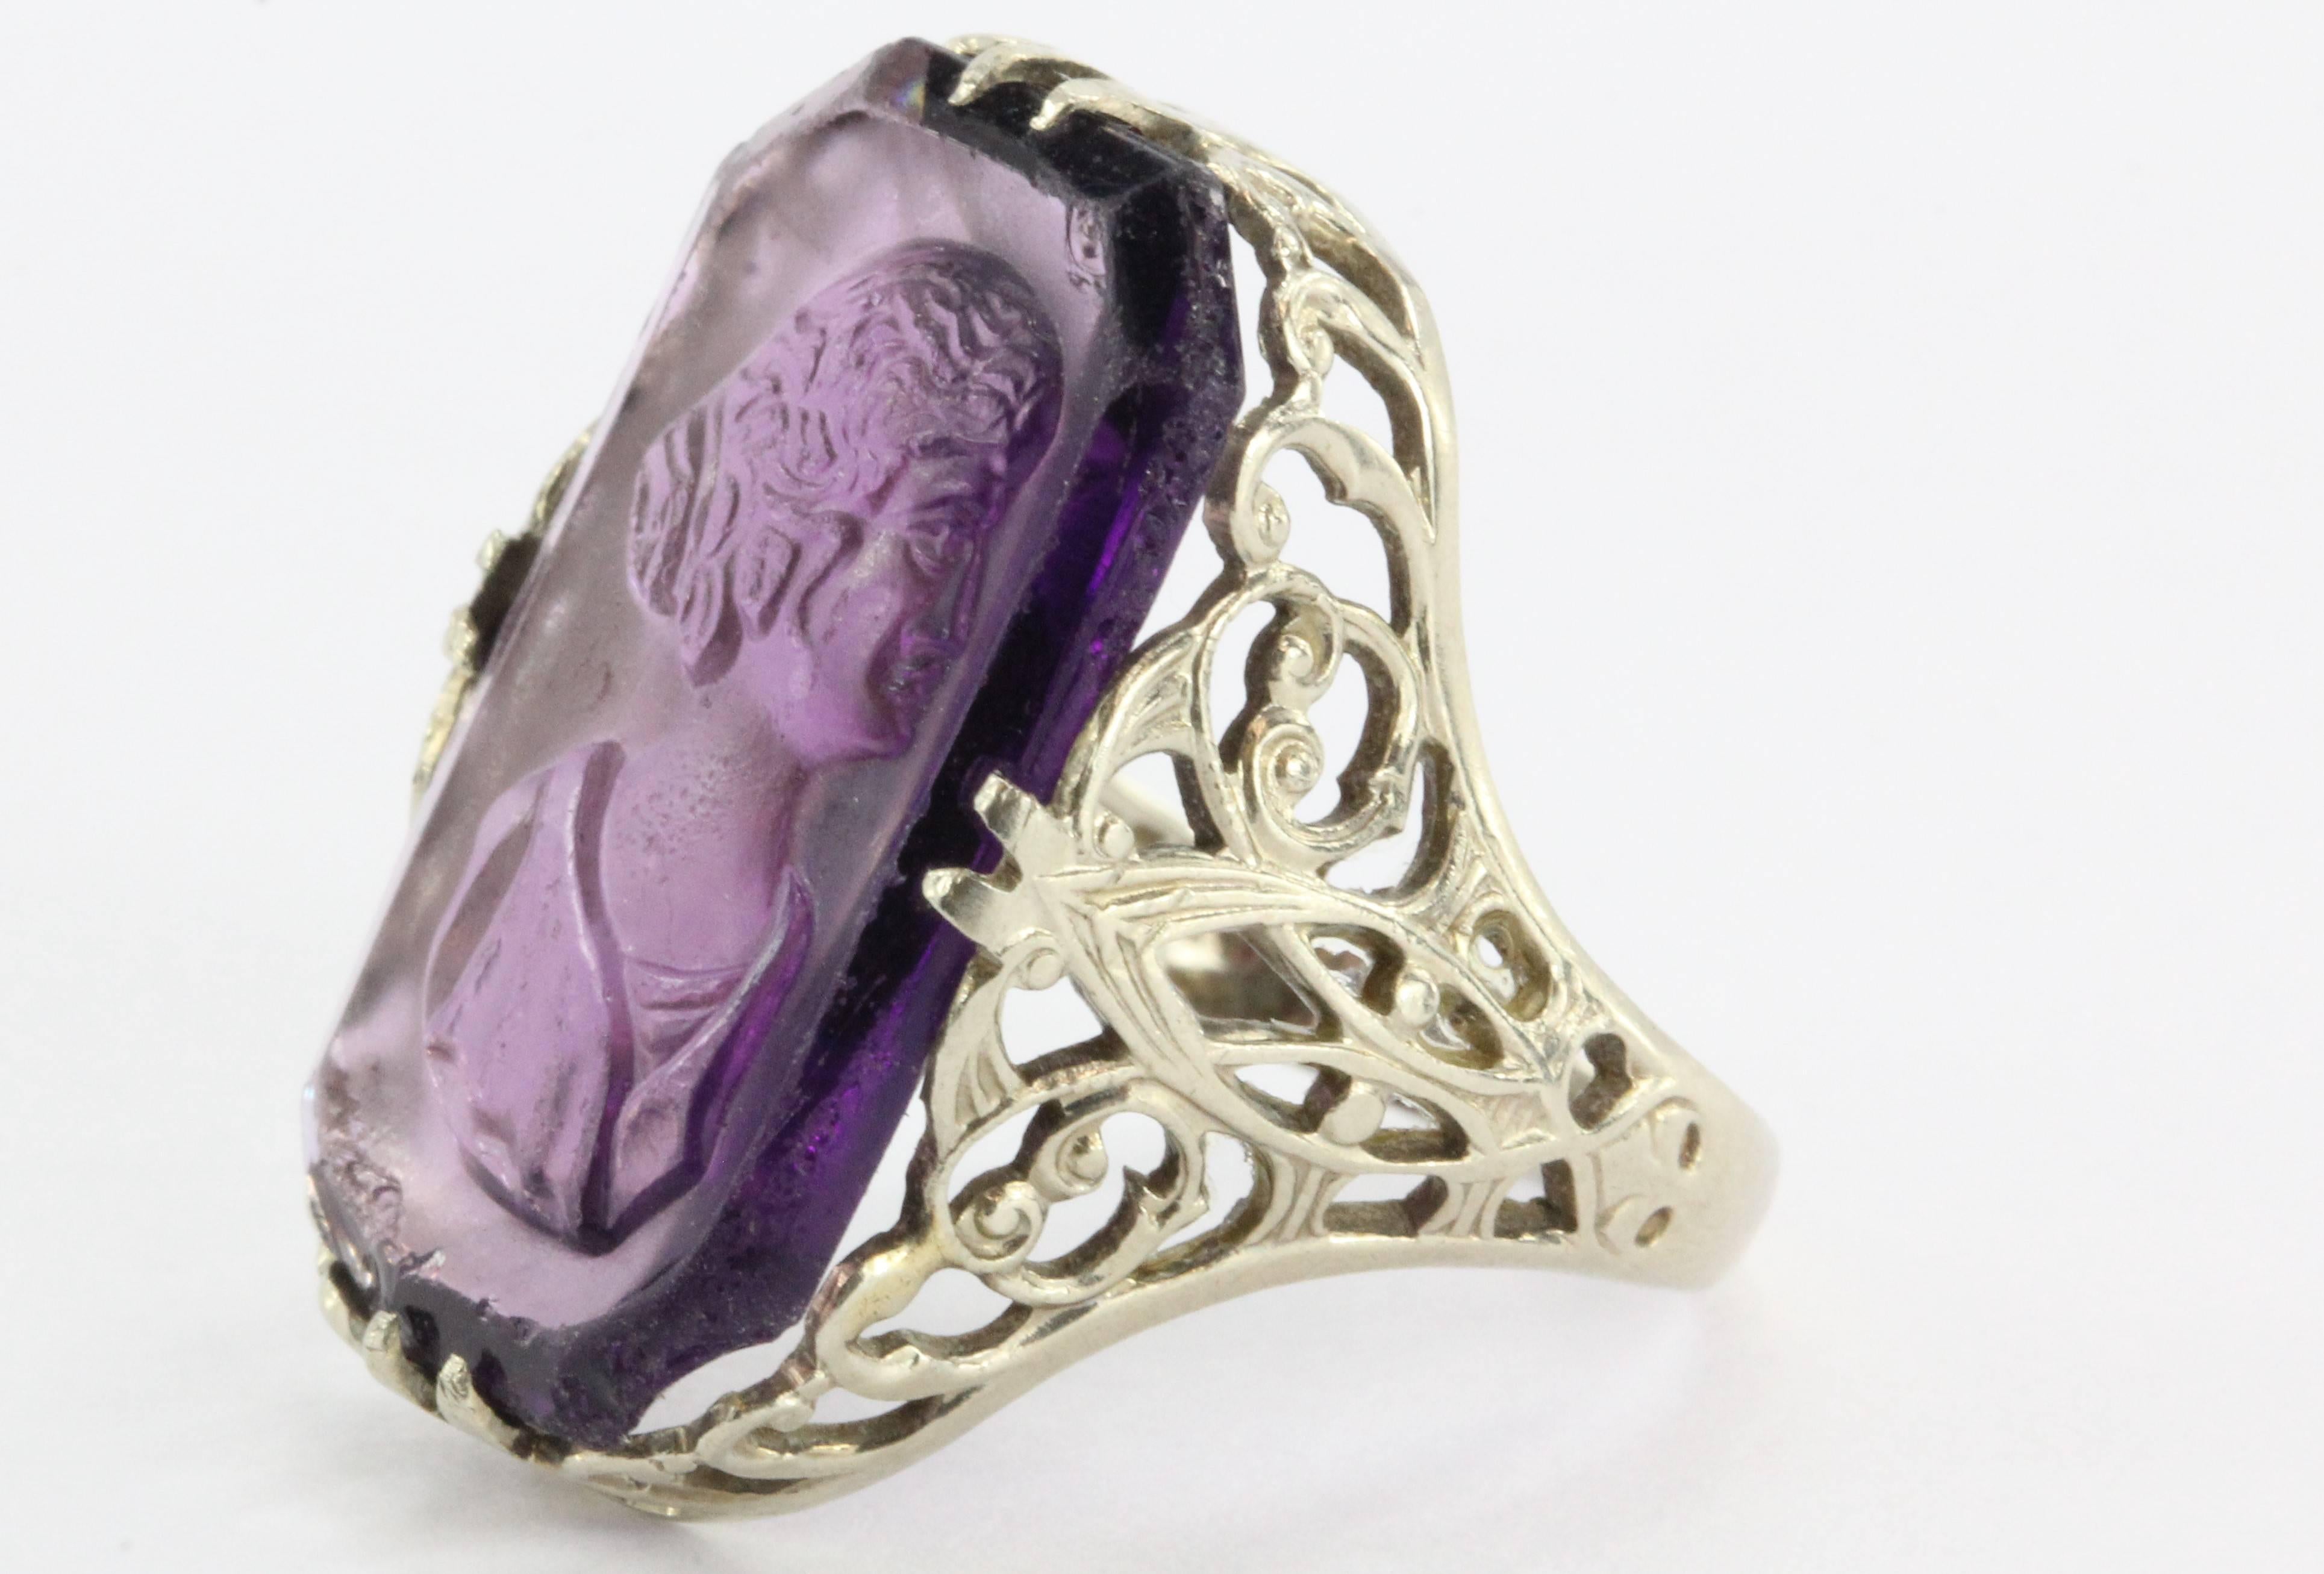 Antique Victorian 14K White Gold Purple Amethyst Glass Cameo Ring Signed. The ring is in great antique estate condition but the cameo is a little loose and it is chipped on its edges. It is hallmarked on the inside 14K and what looks like a small S.